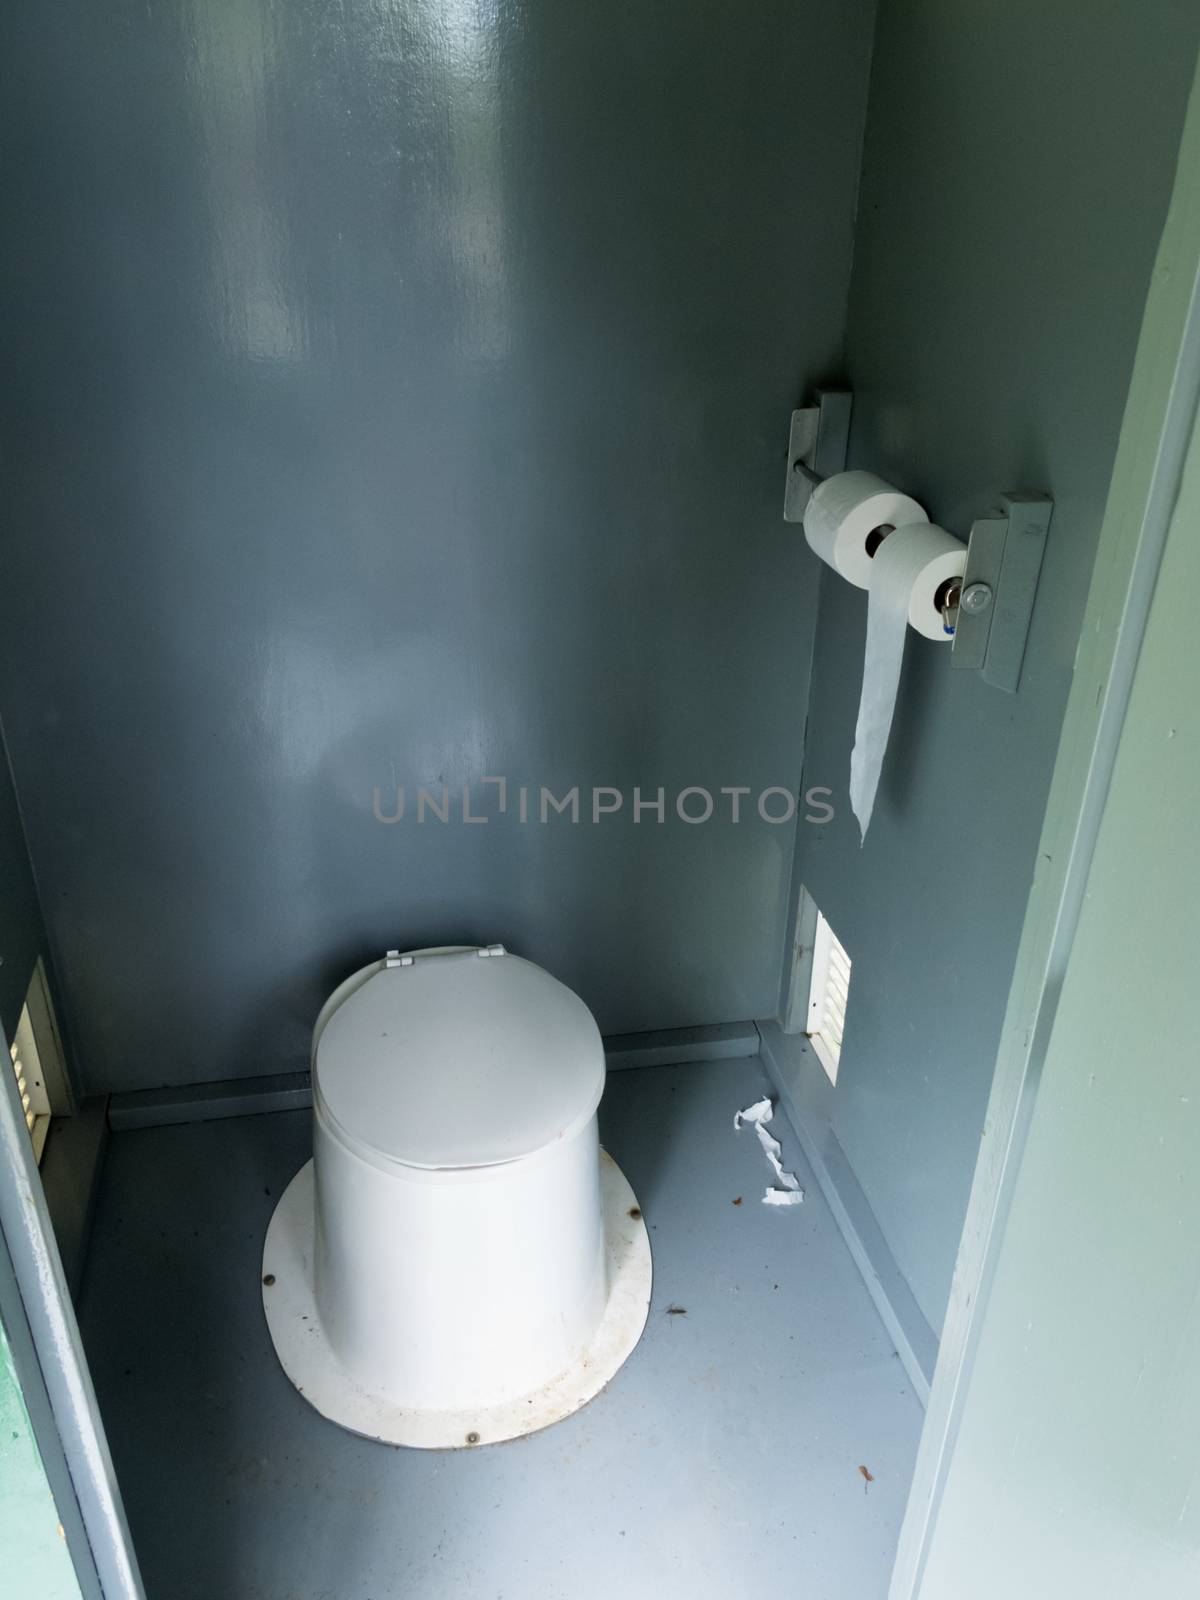 Campground pit toilet outhouse inside white plastic toilet and dirty interior to the toilet bowl